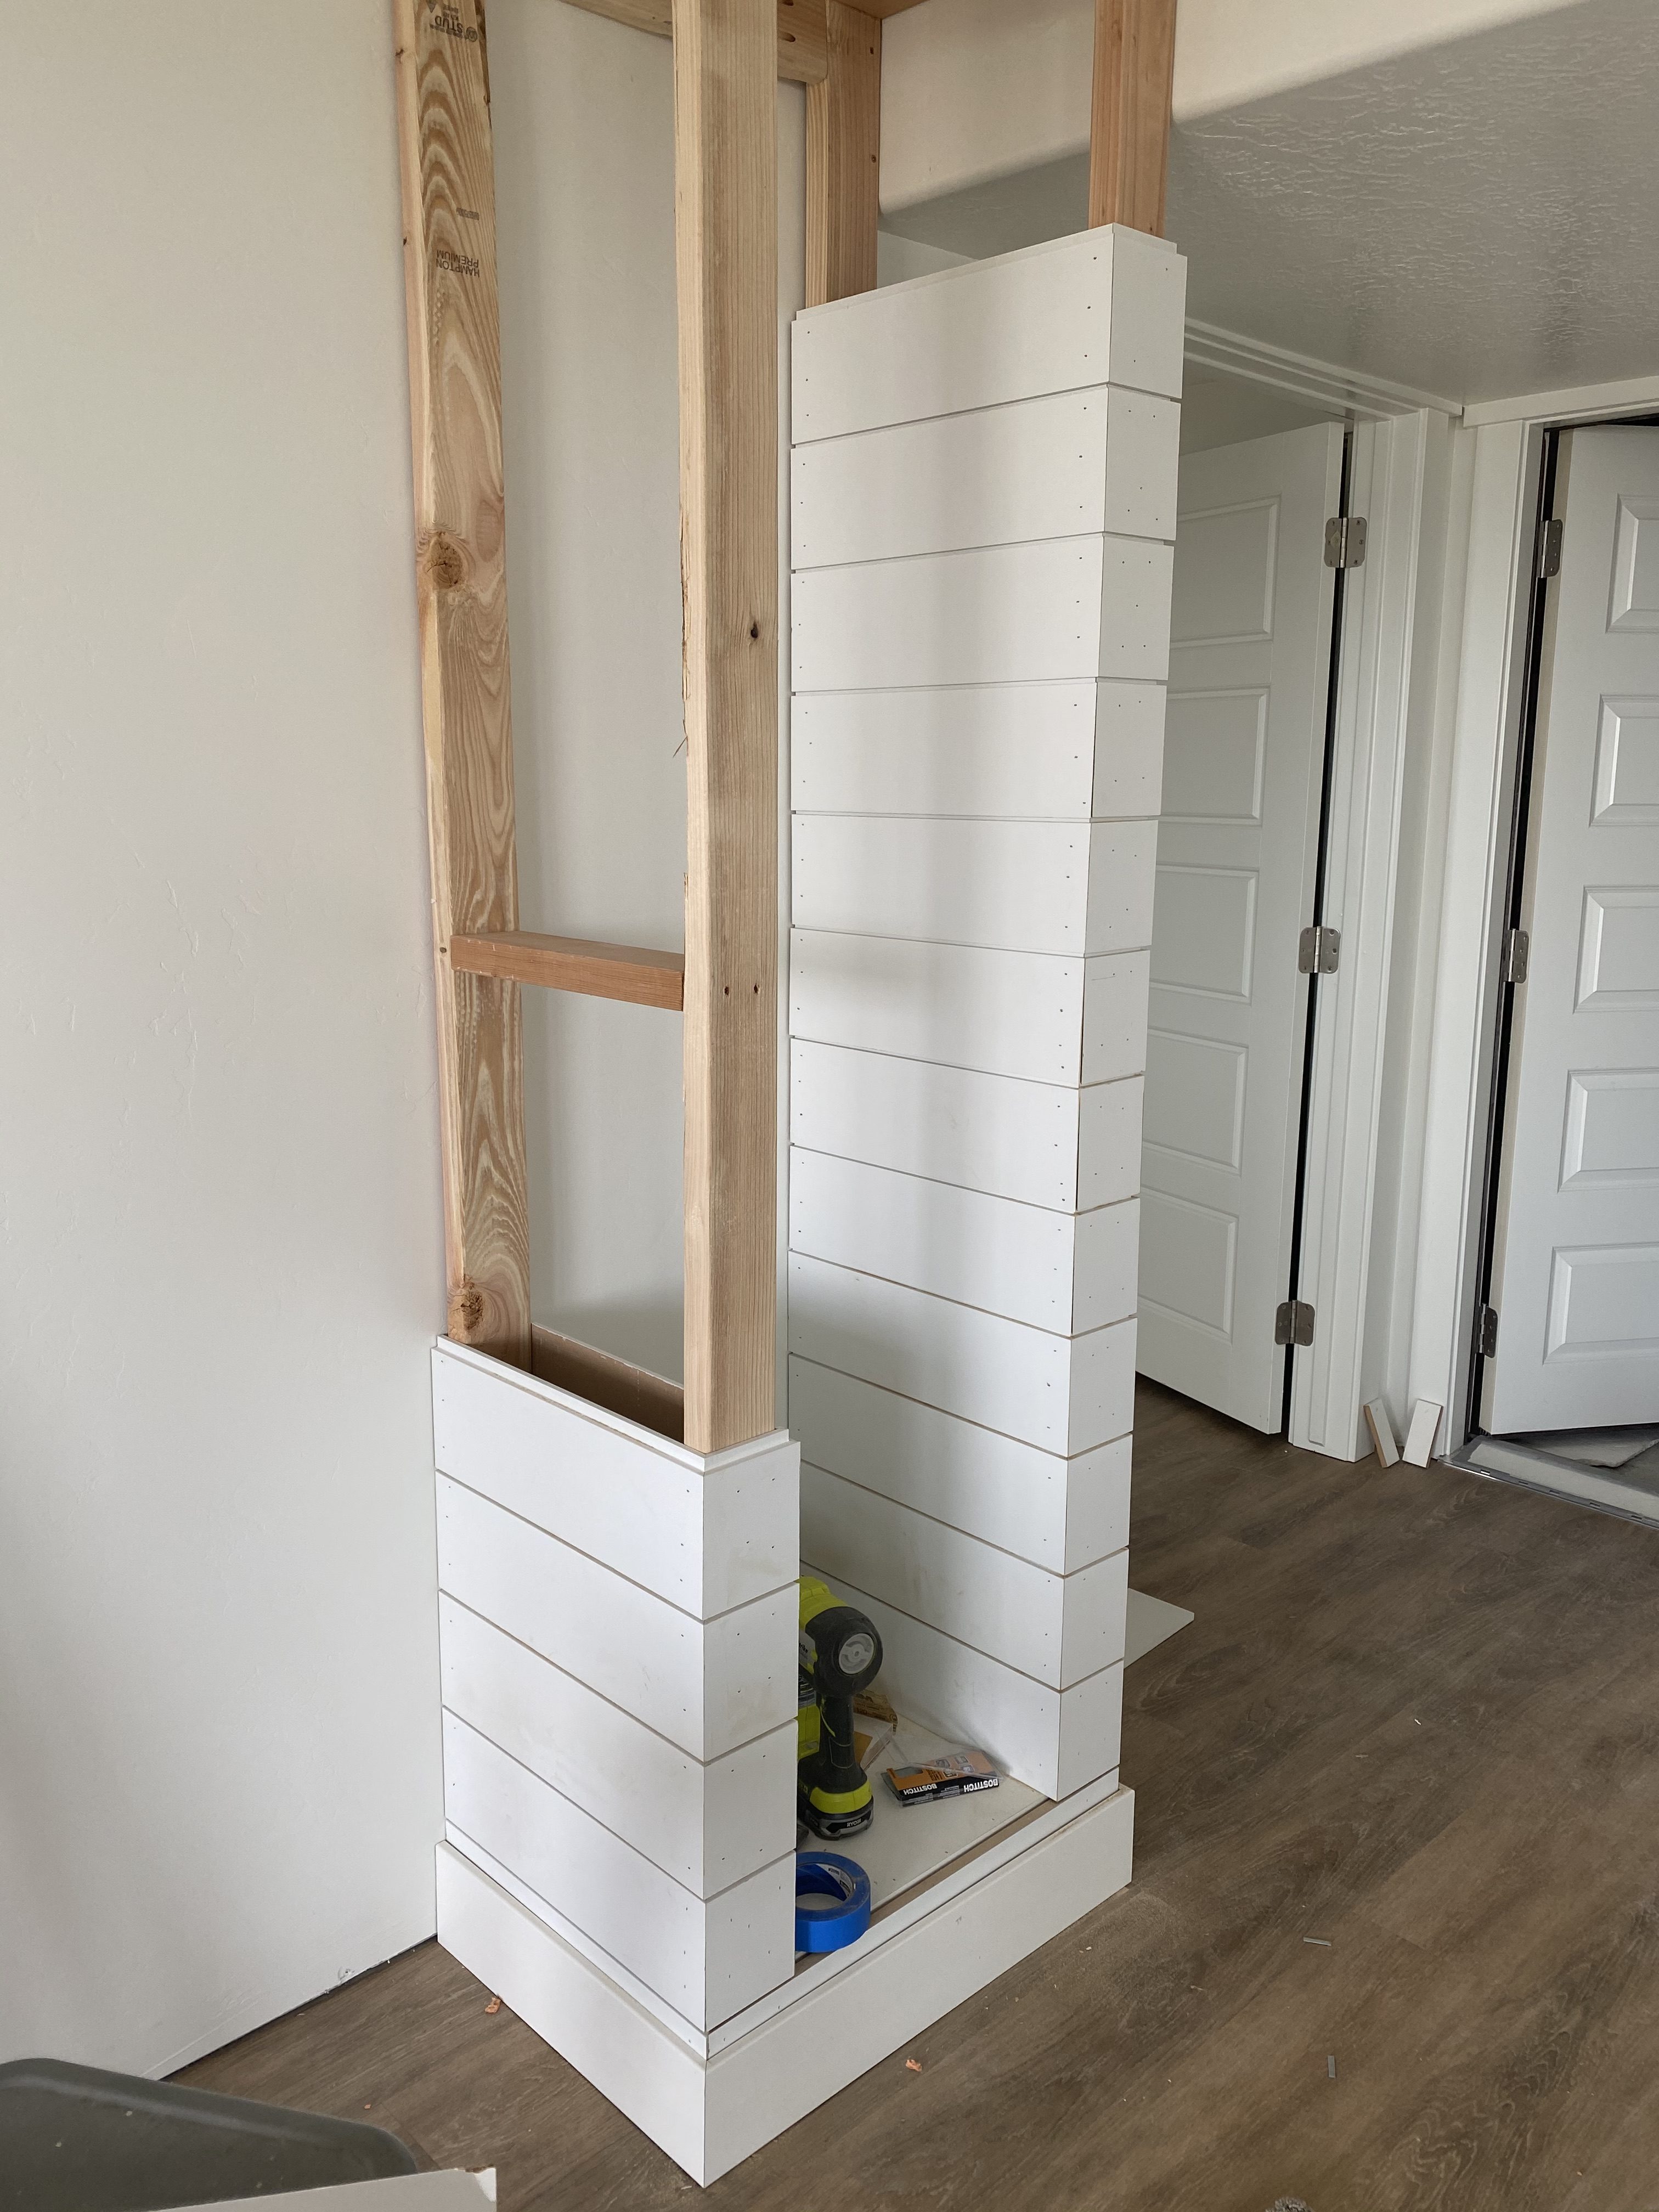 wrapping builtins with shiplap